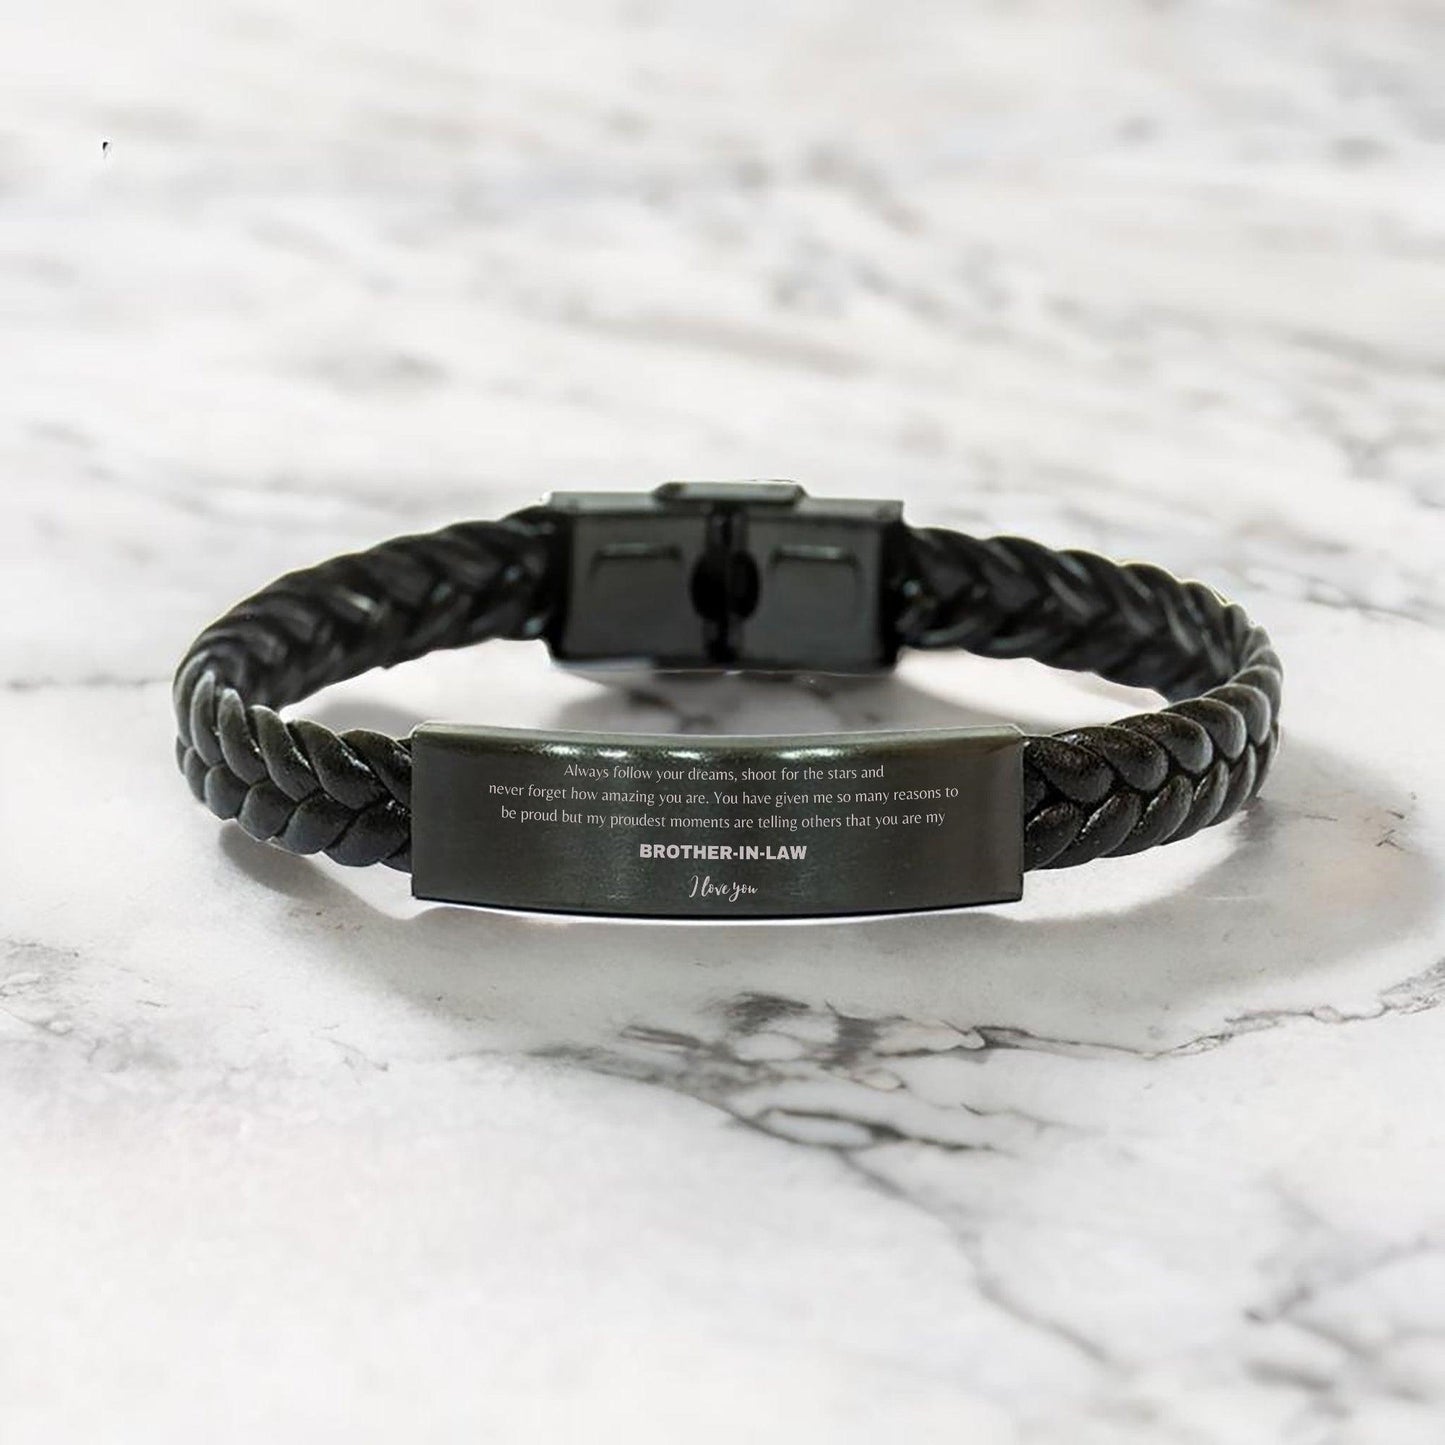 Brother-in-Law Braided Leather Engraved Bracelet - Always Follow your Dreams - Birthday, Christmas Holiday Jewelry Gift - Mallard Moon Gift Shop